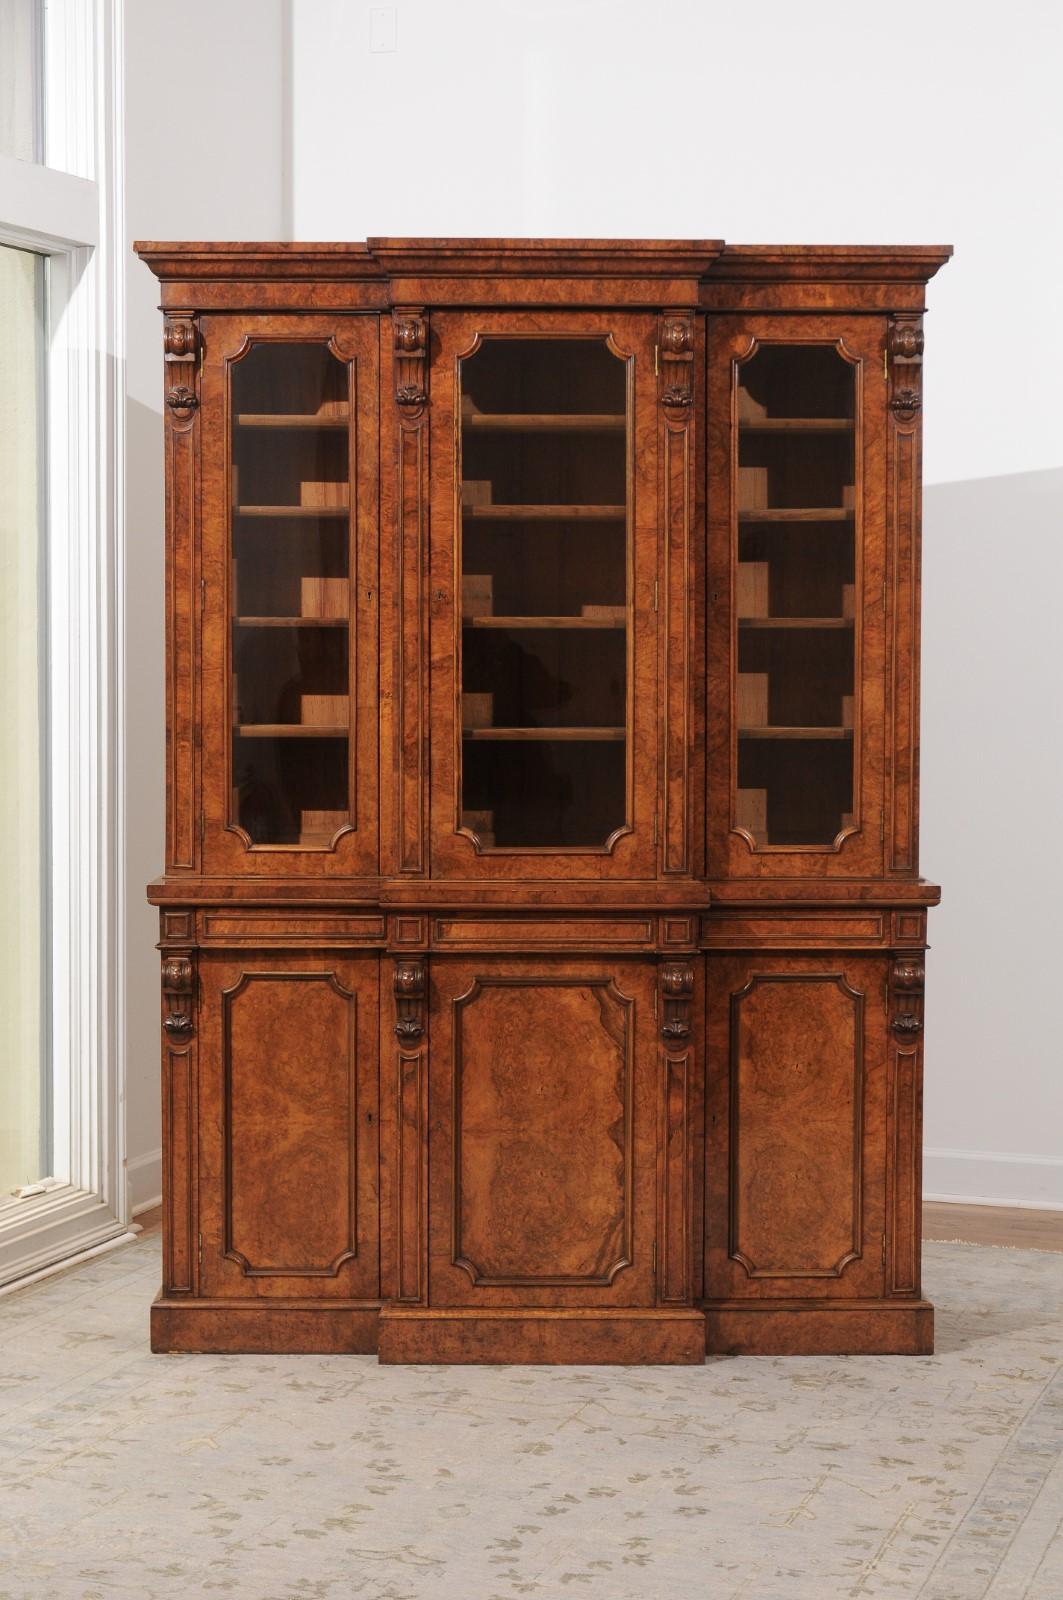 An English burled walnut breakfront bookcase from the late 19th century, with glass doors and carved volutes. Born in England in the last quarter of the 19th century, this splendid bookcase features a burled walnut structure, topped with a beveled